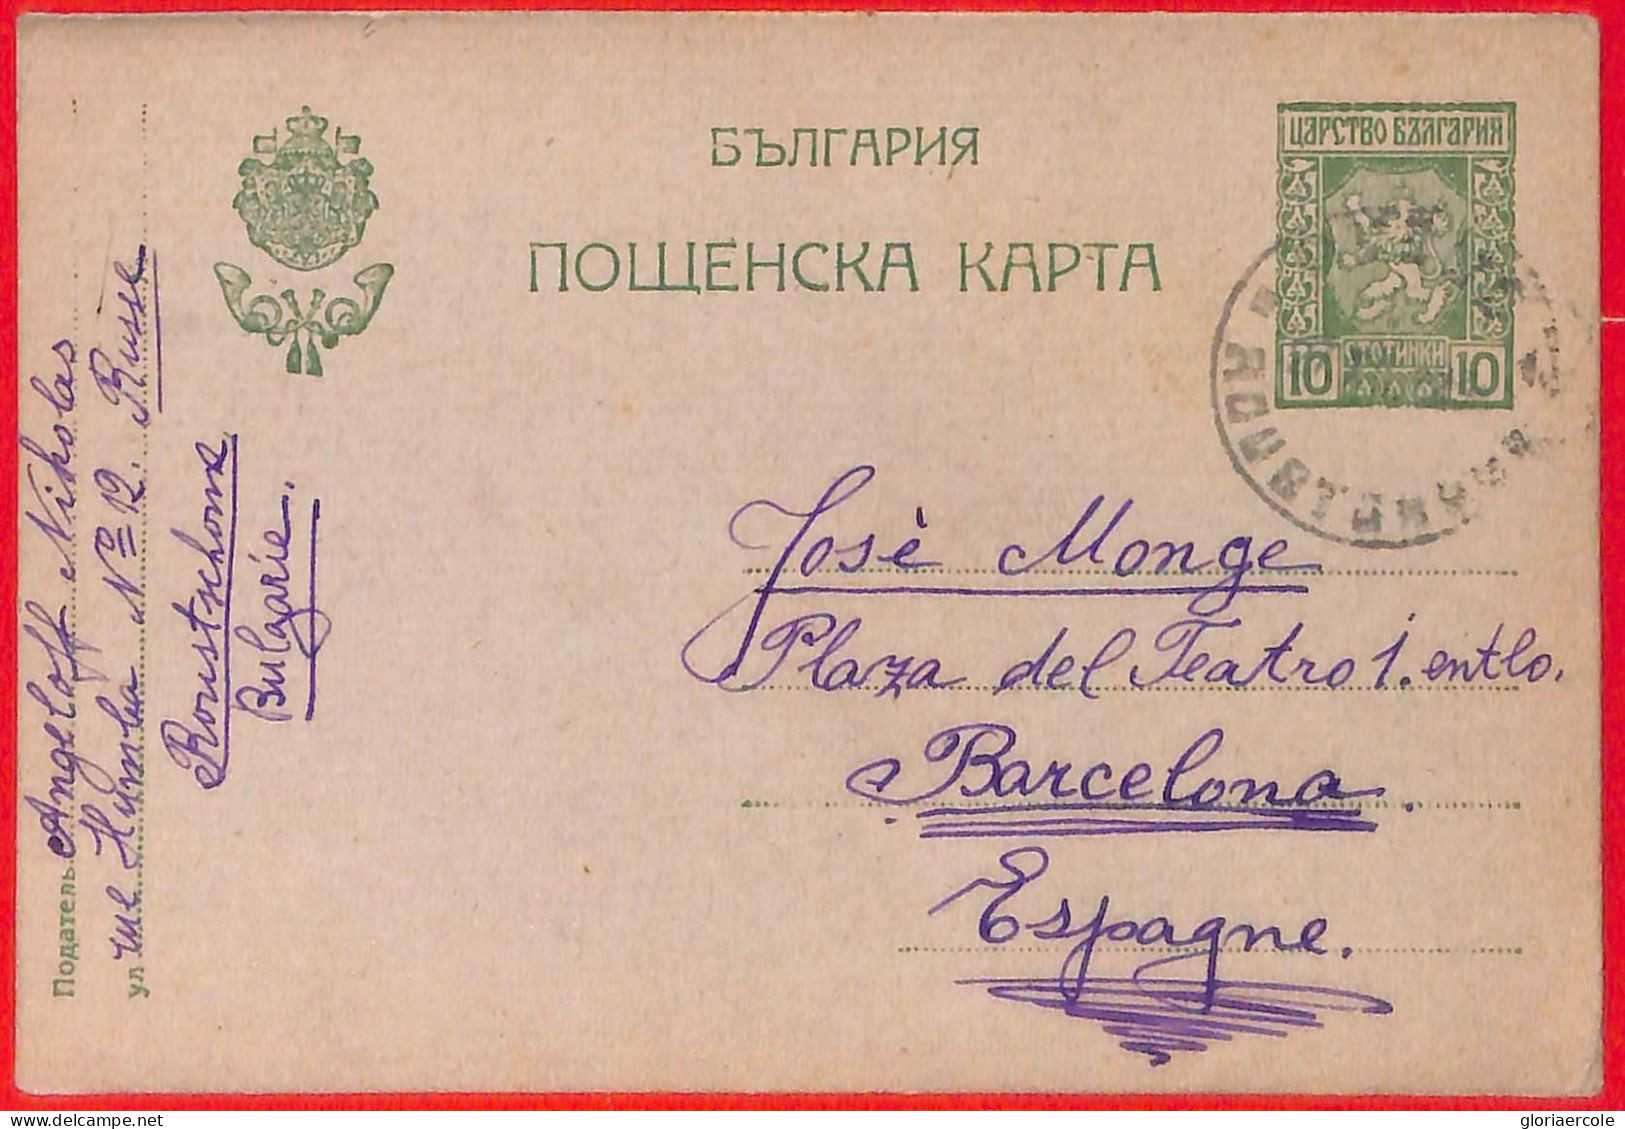 Aa0504 - BULGARIA - Postal History - STATIONERY CARD From ROUSTOUCK To SPAIN  1920 - Cartes Postales